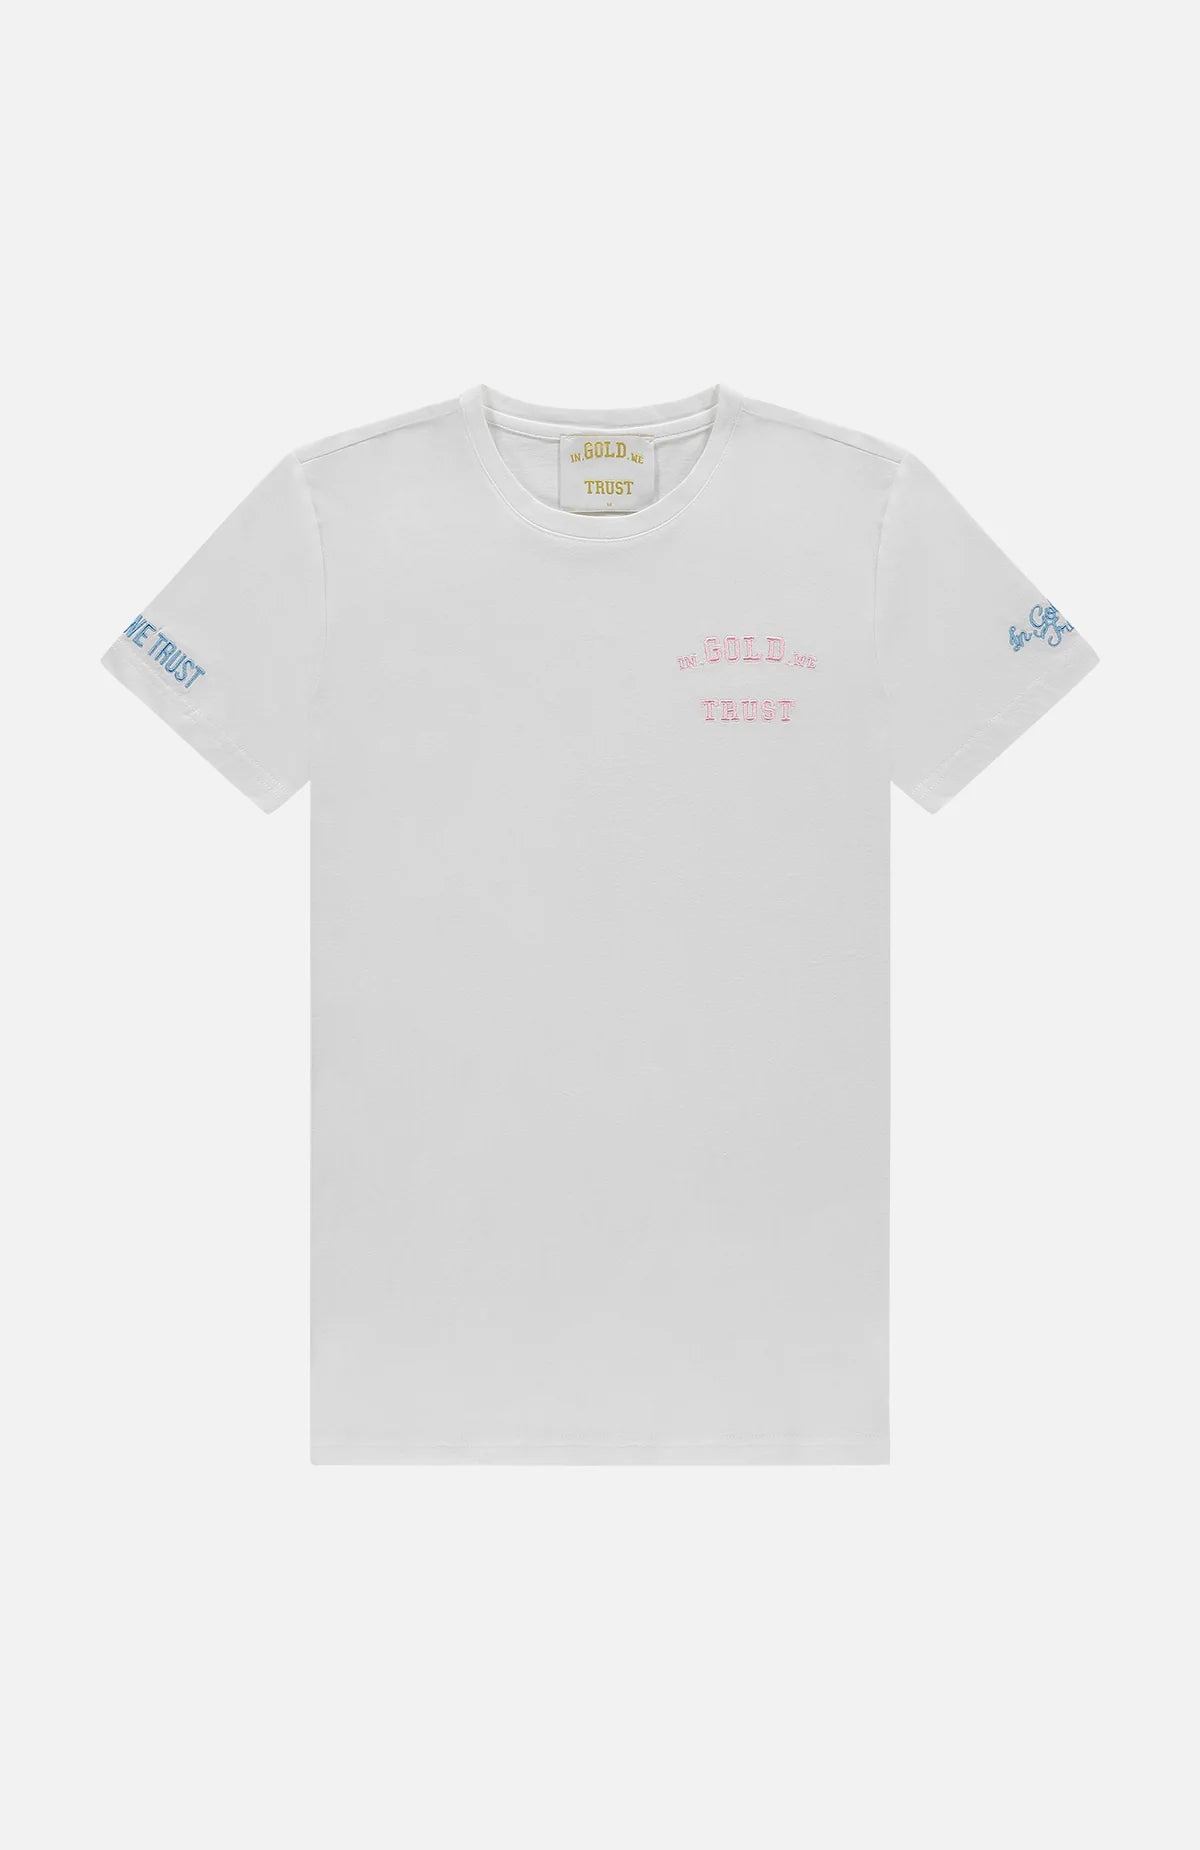 In gold we trust the pusha t-shirt - white